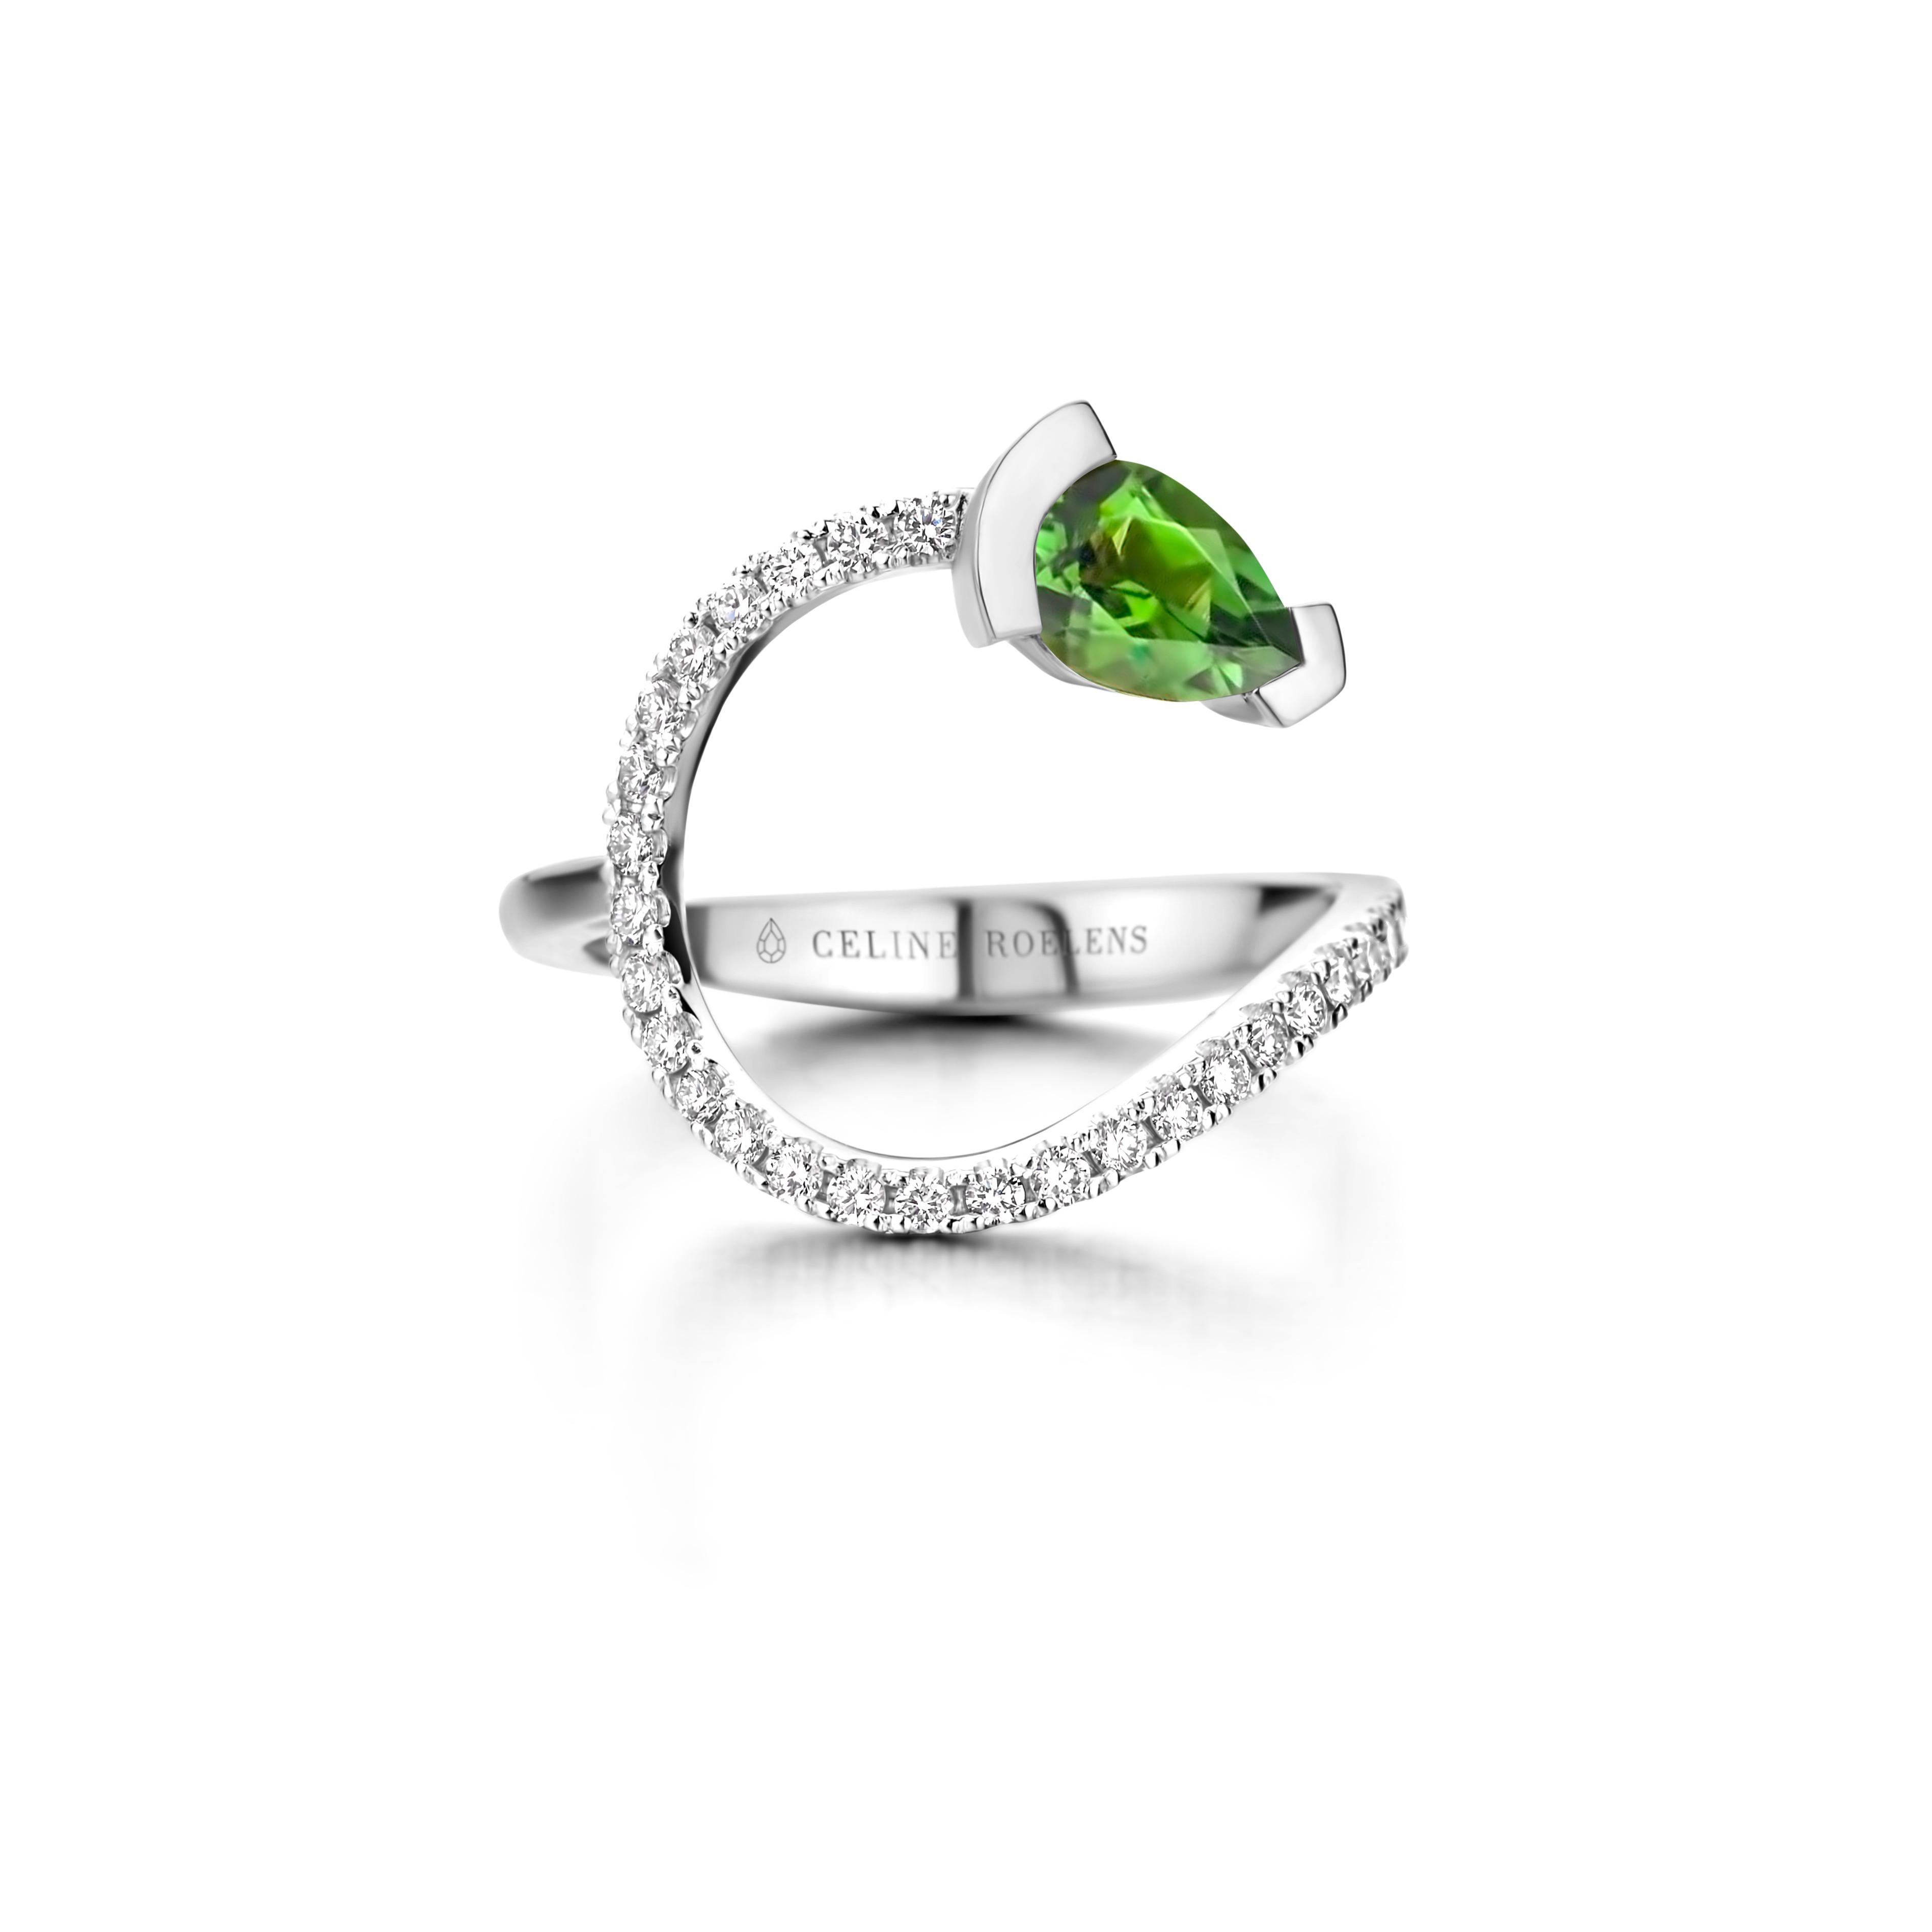 ADELINE curved ring in 18Kt rose gold set with a pear shaped Green tourmaline and 0,33 Ct of white brilliant cut diamonds - VS F quality.